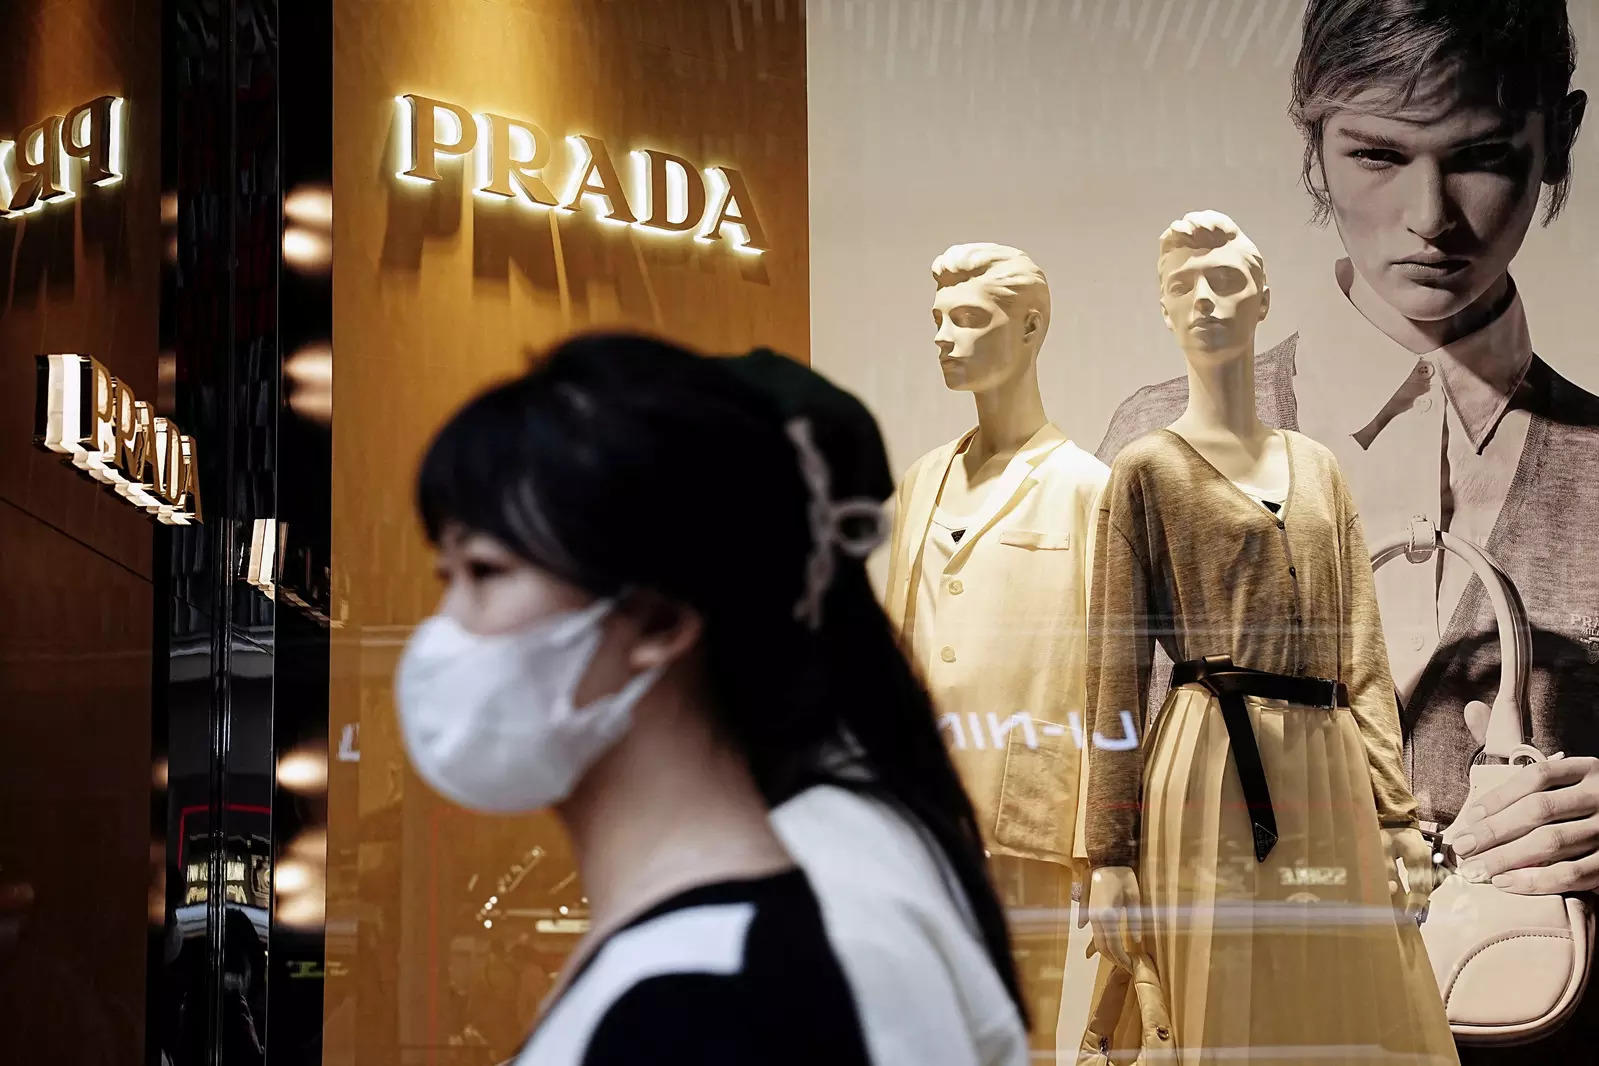 Prada aims to hire over 400 workers in Italy this year